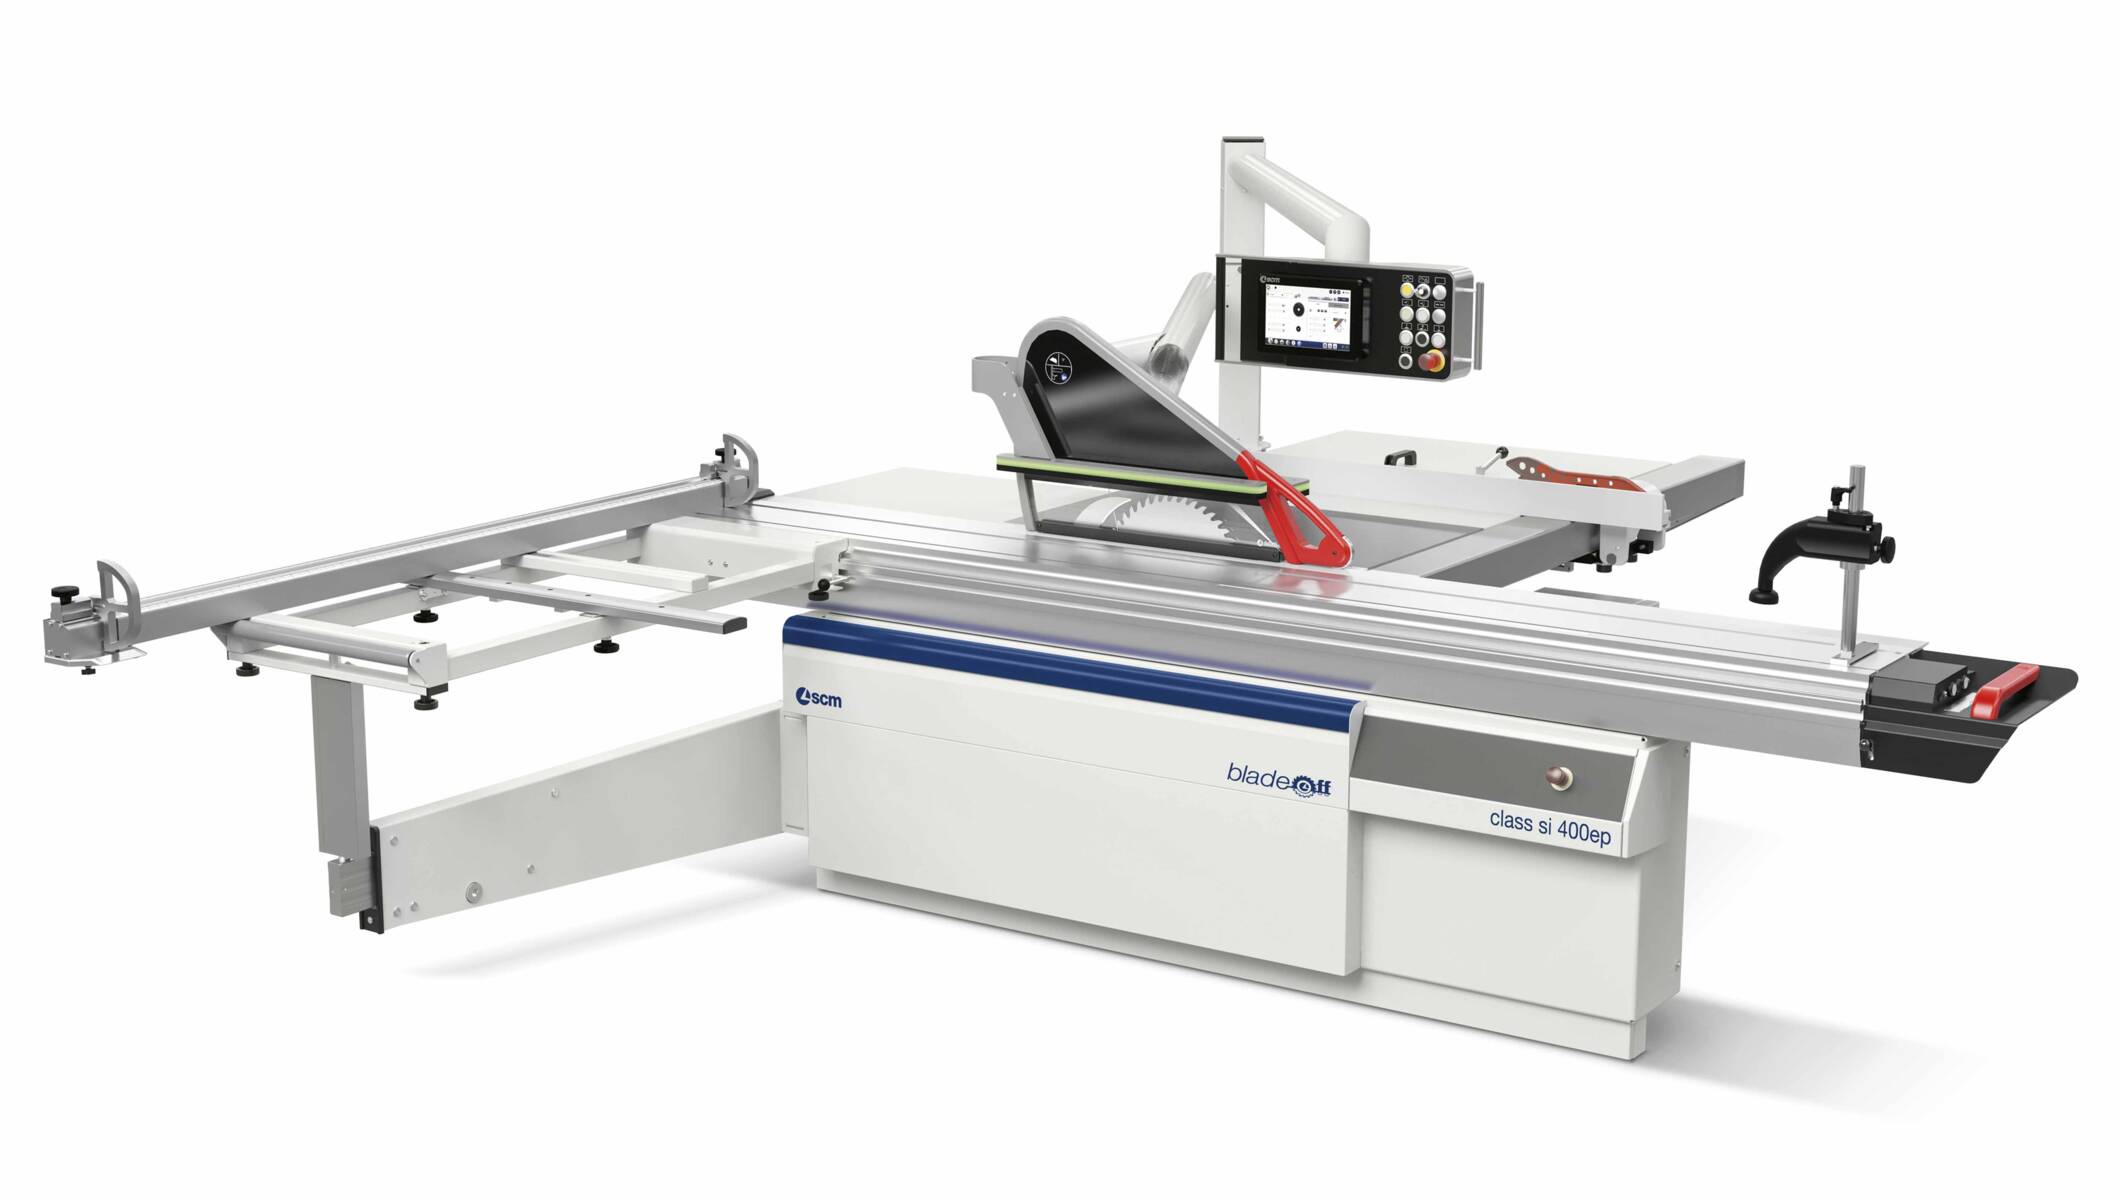 Joinery machines - Sliding table saws - class si 400ep blade off